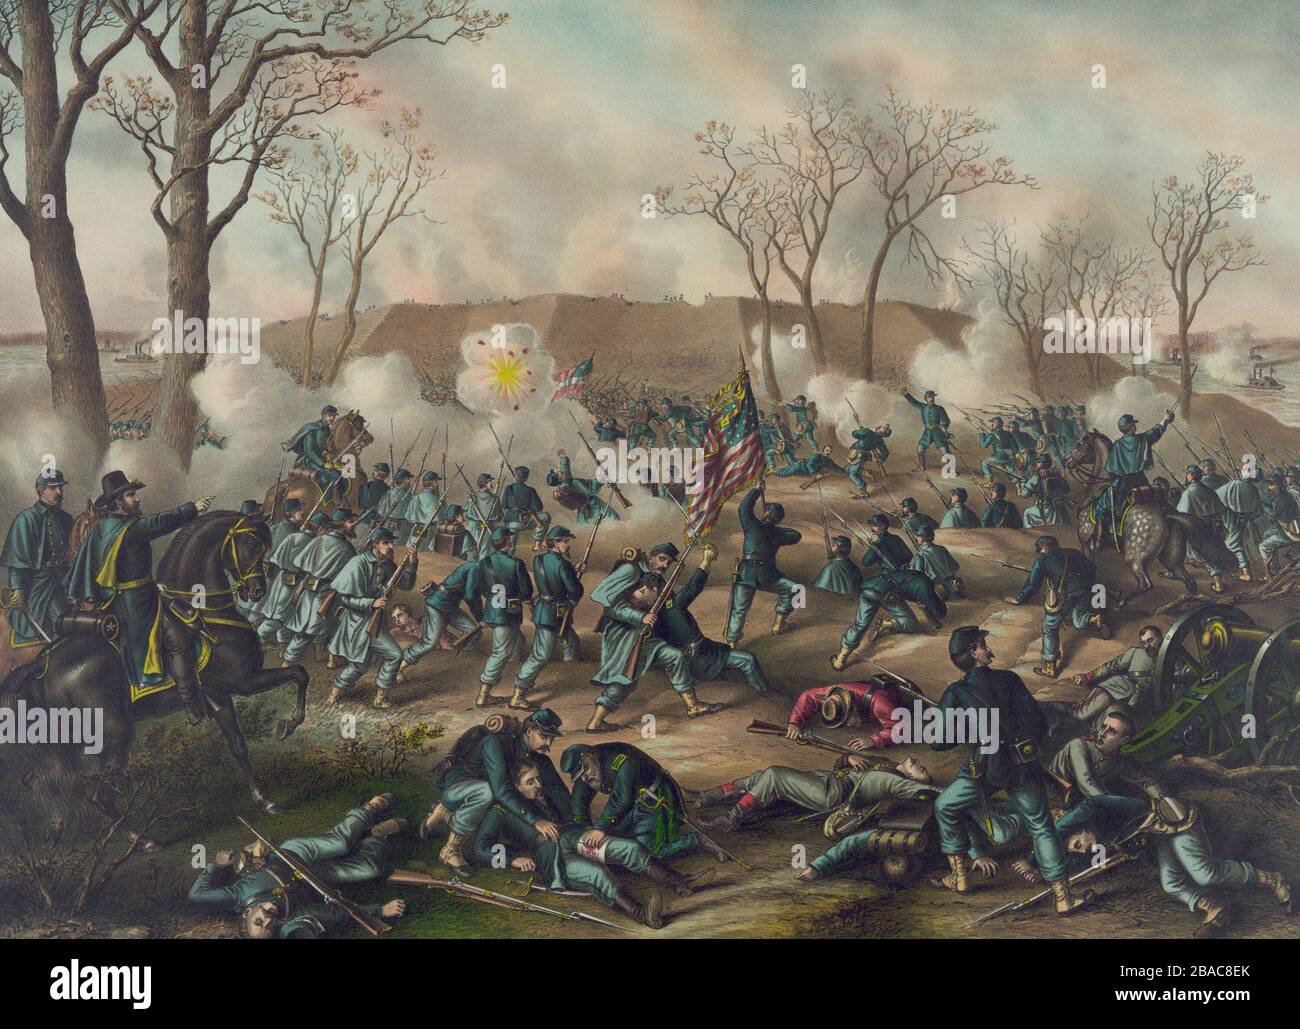 US Civil War, Battle of Fort Donelson, Tennessee, Feb. 14-16, 1862. A imaginative scene of Union troops at the climax of the battle on Feb. 15th, 1862, including equestrian portrait Union commander, Ulysses Grant  (BSLOC 2018 7 29) Stock Photo